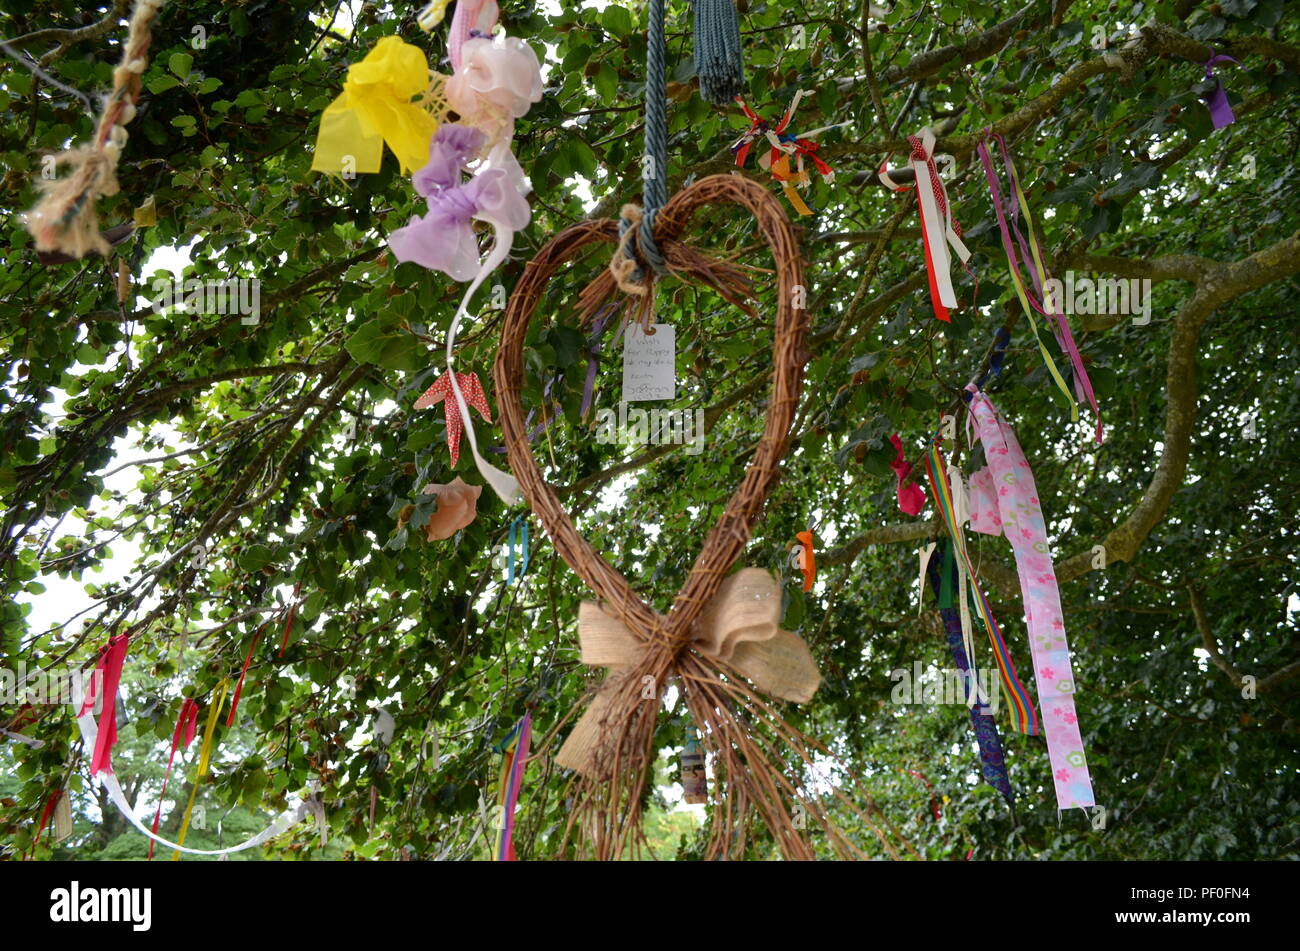 A wishing tree at Avebury, a monument containing three stone circles, around the village of Avebury in Wiltshire, in southwest England. Stock Photo